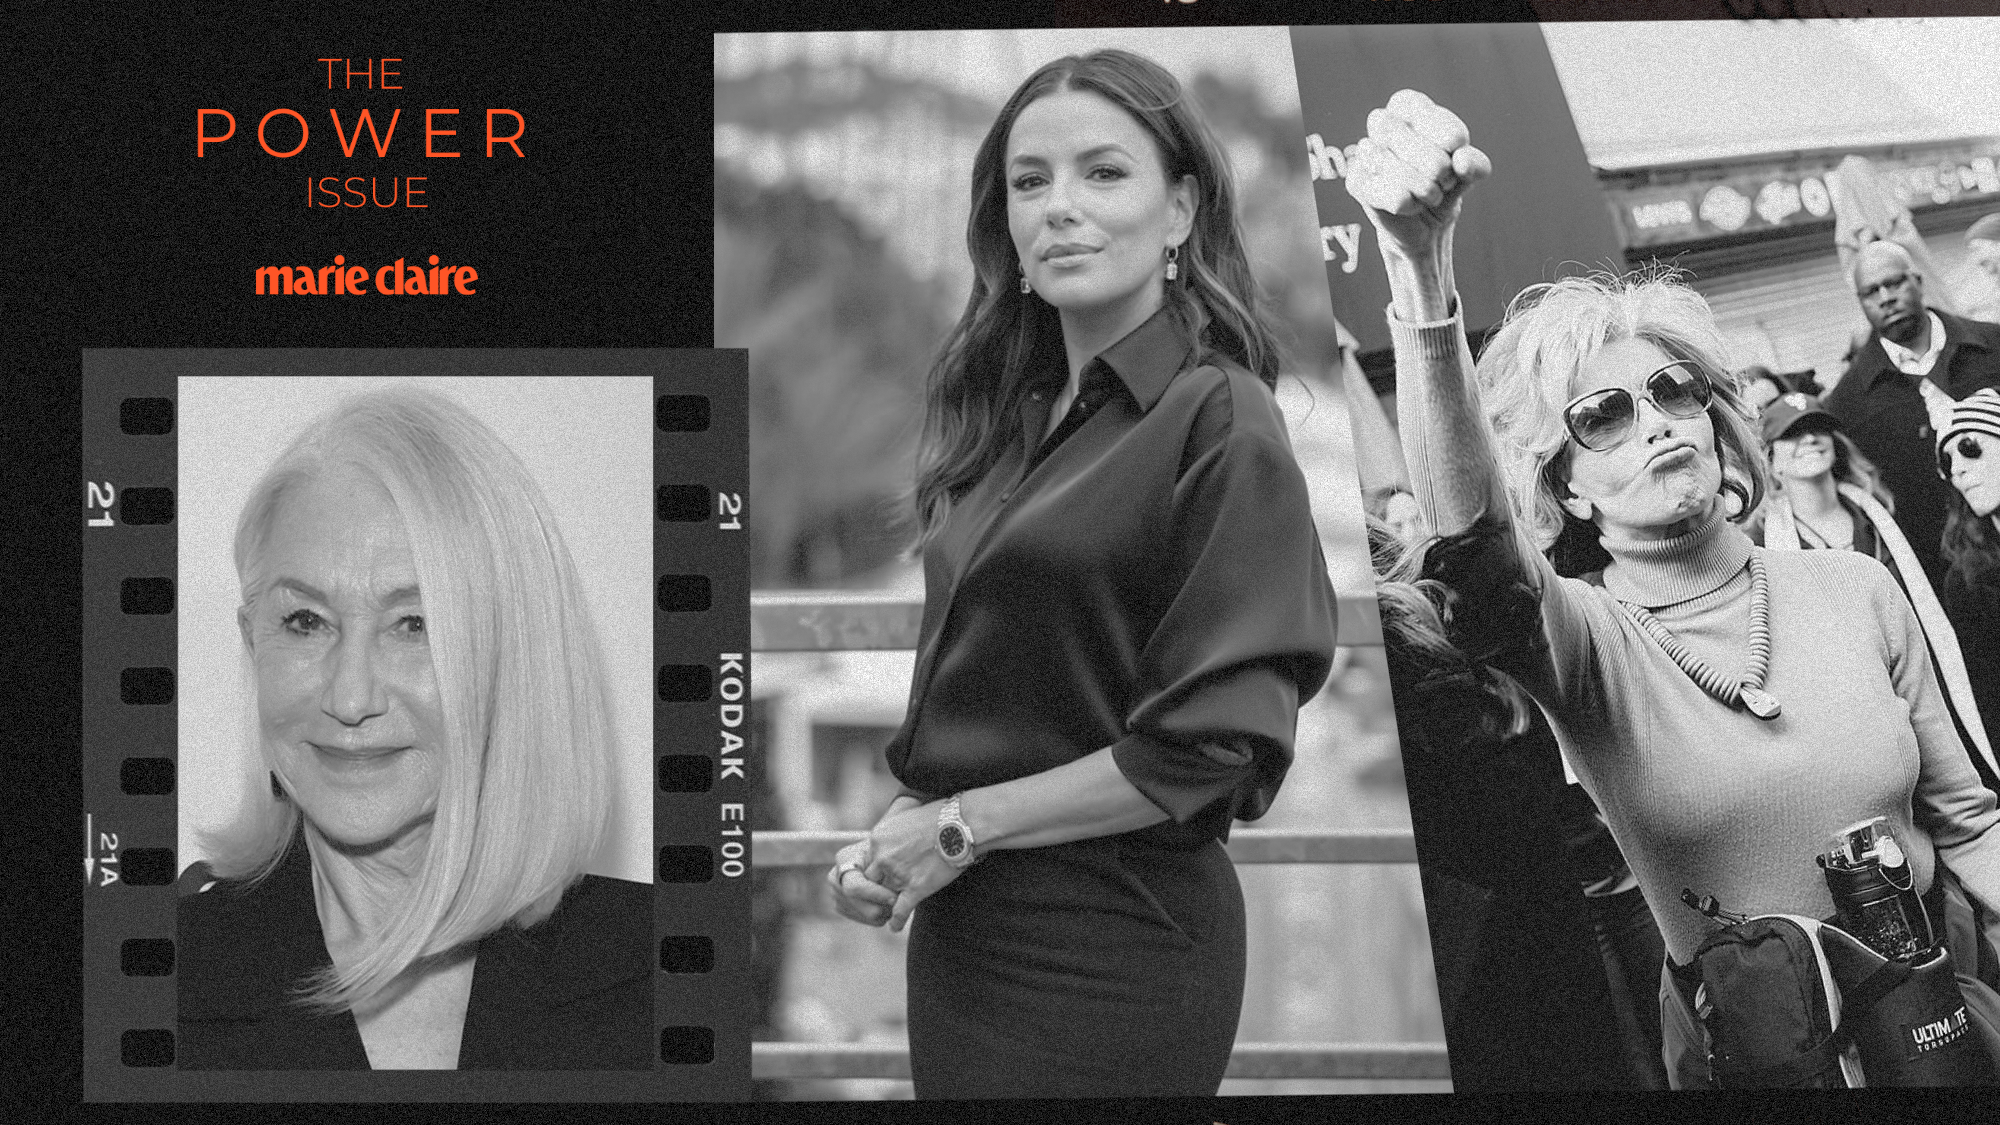 A montage of black and white imagery, including shots of Eva Longoria, Helen Mirren and Jane Fonda in a collage, with the words THE POWER ISSUE and the Marie Claire logo in a bright bold orange colour